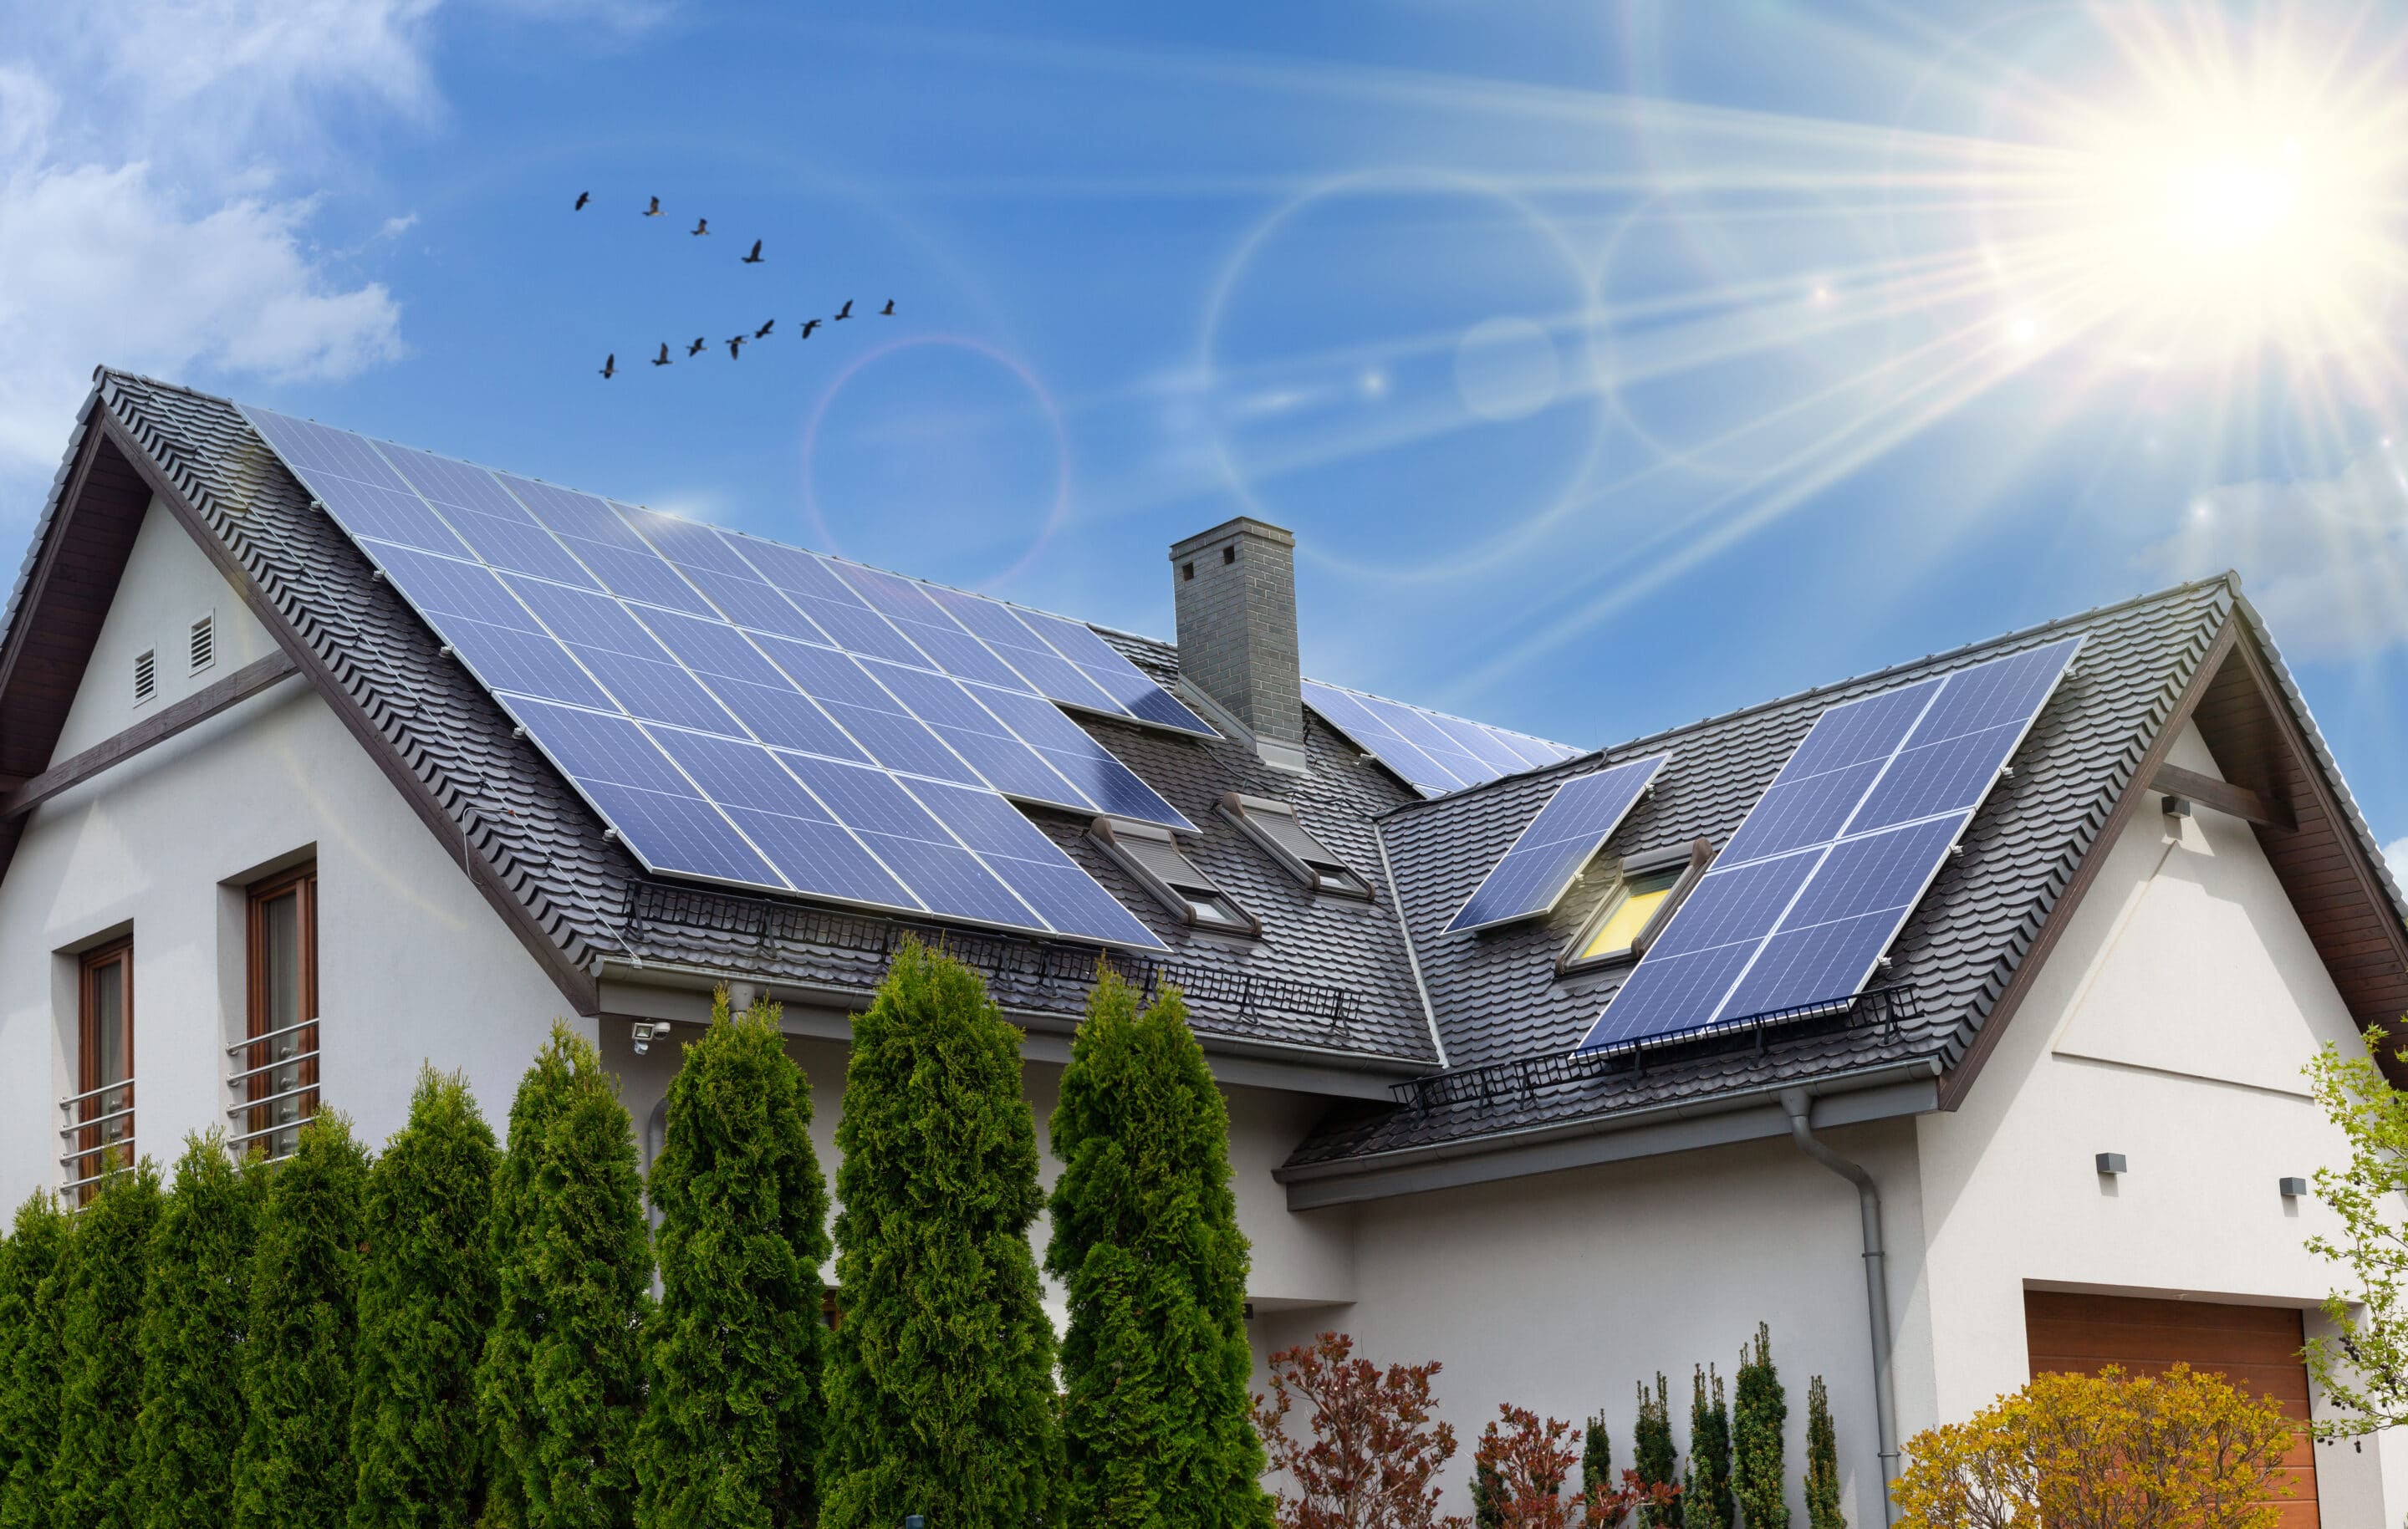 How Many Solar Panels Does it Take to Power a House?